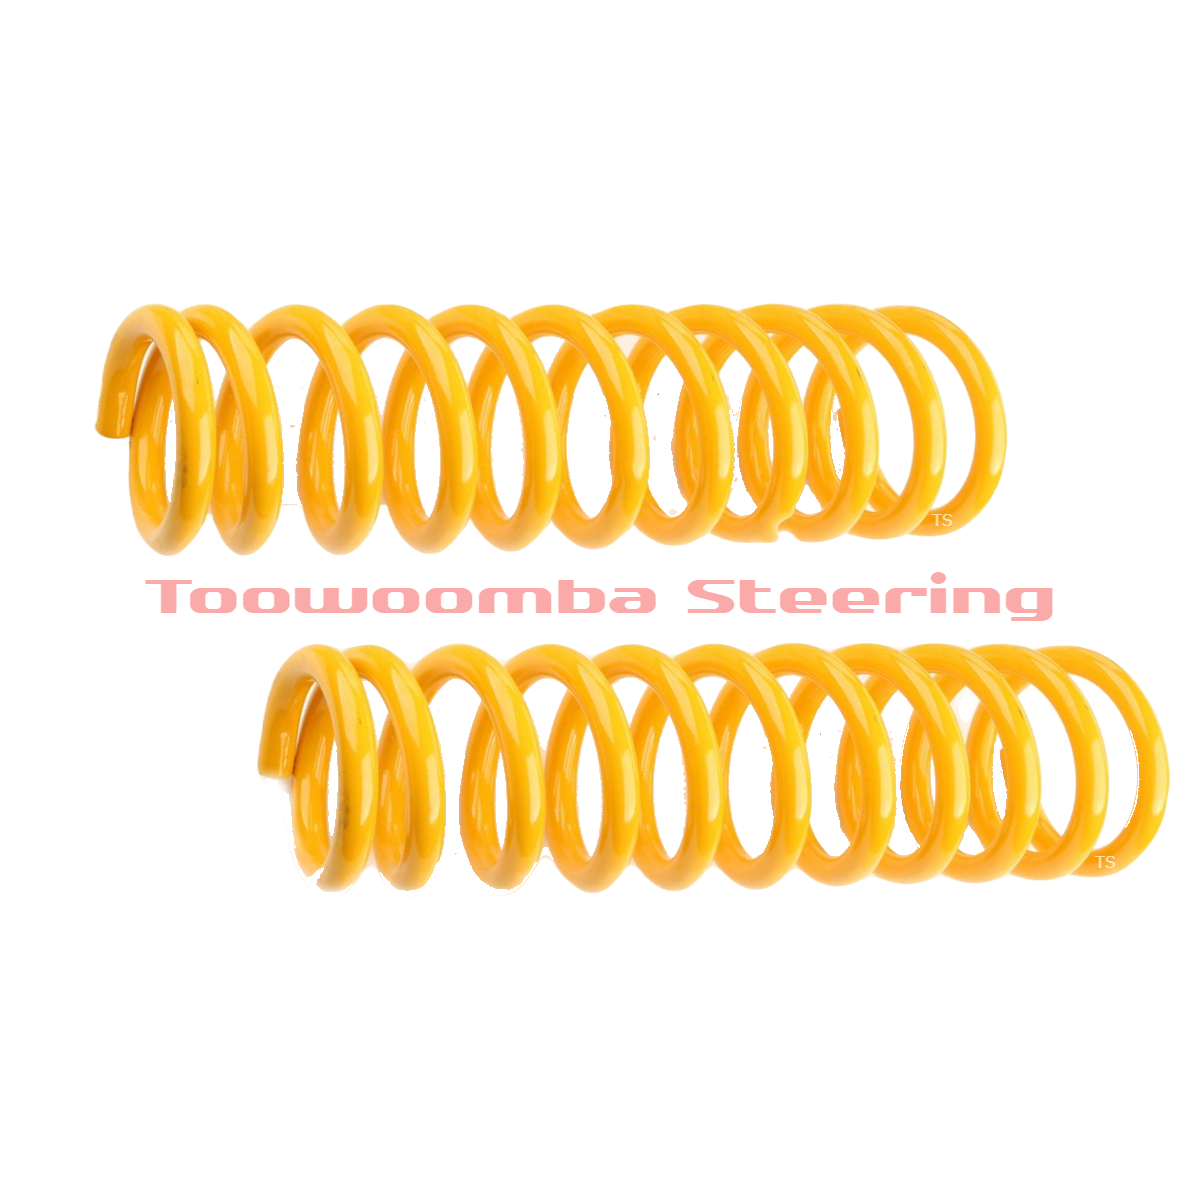 Rear Lowered King Springs  -  Ideal for -  Subaru Liberty 5TH GEN SEDAN – 2.5 NON TURBO 09-14, Subaru Liberty 5TH GEN SEDAN – 3.6 V6 & 2.5TURBO 09-14, Subaru Liberty 6TH GEN SEDAN 2.5L (2014-ON) - (KSRL-58)